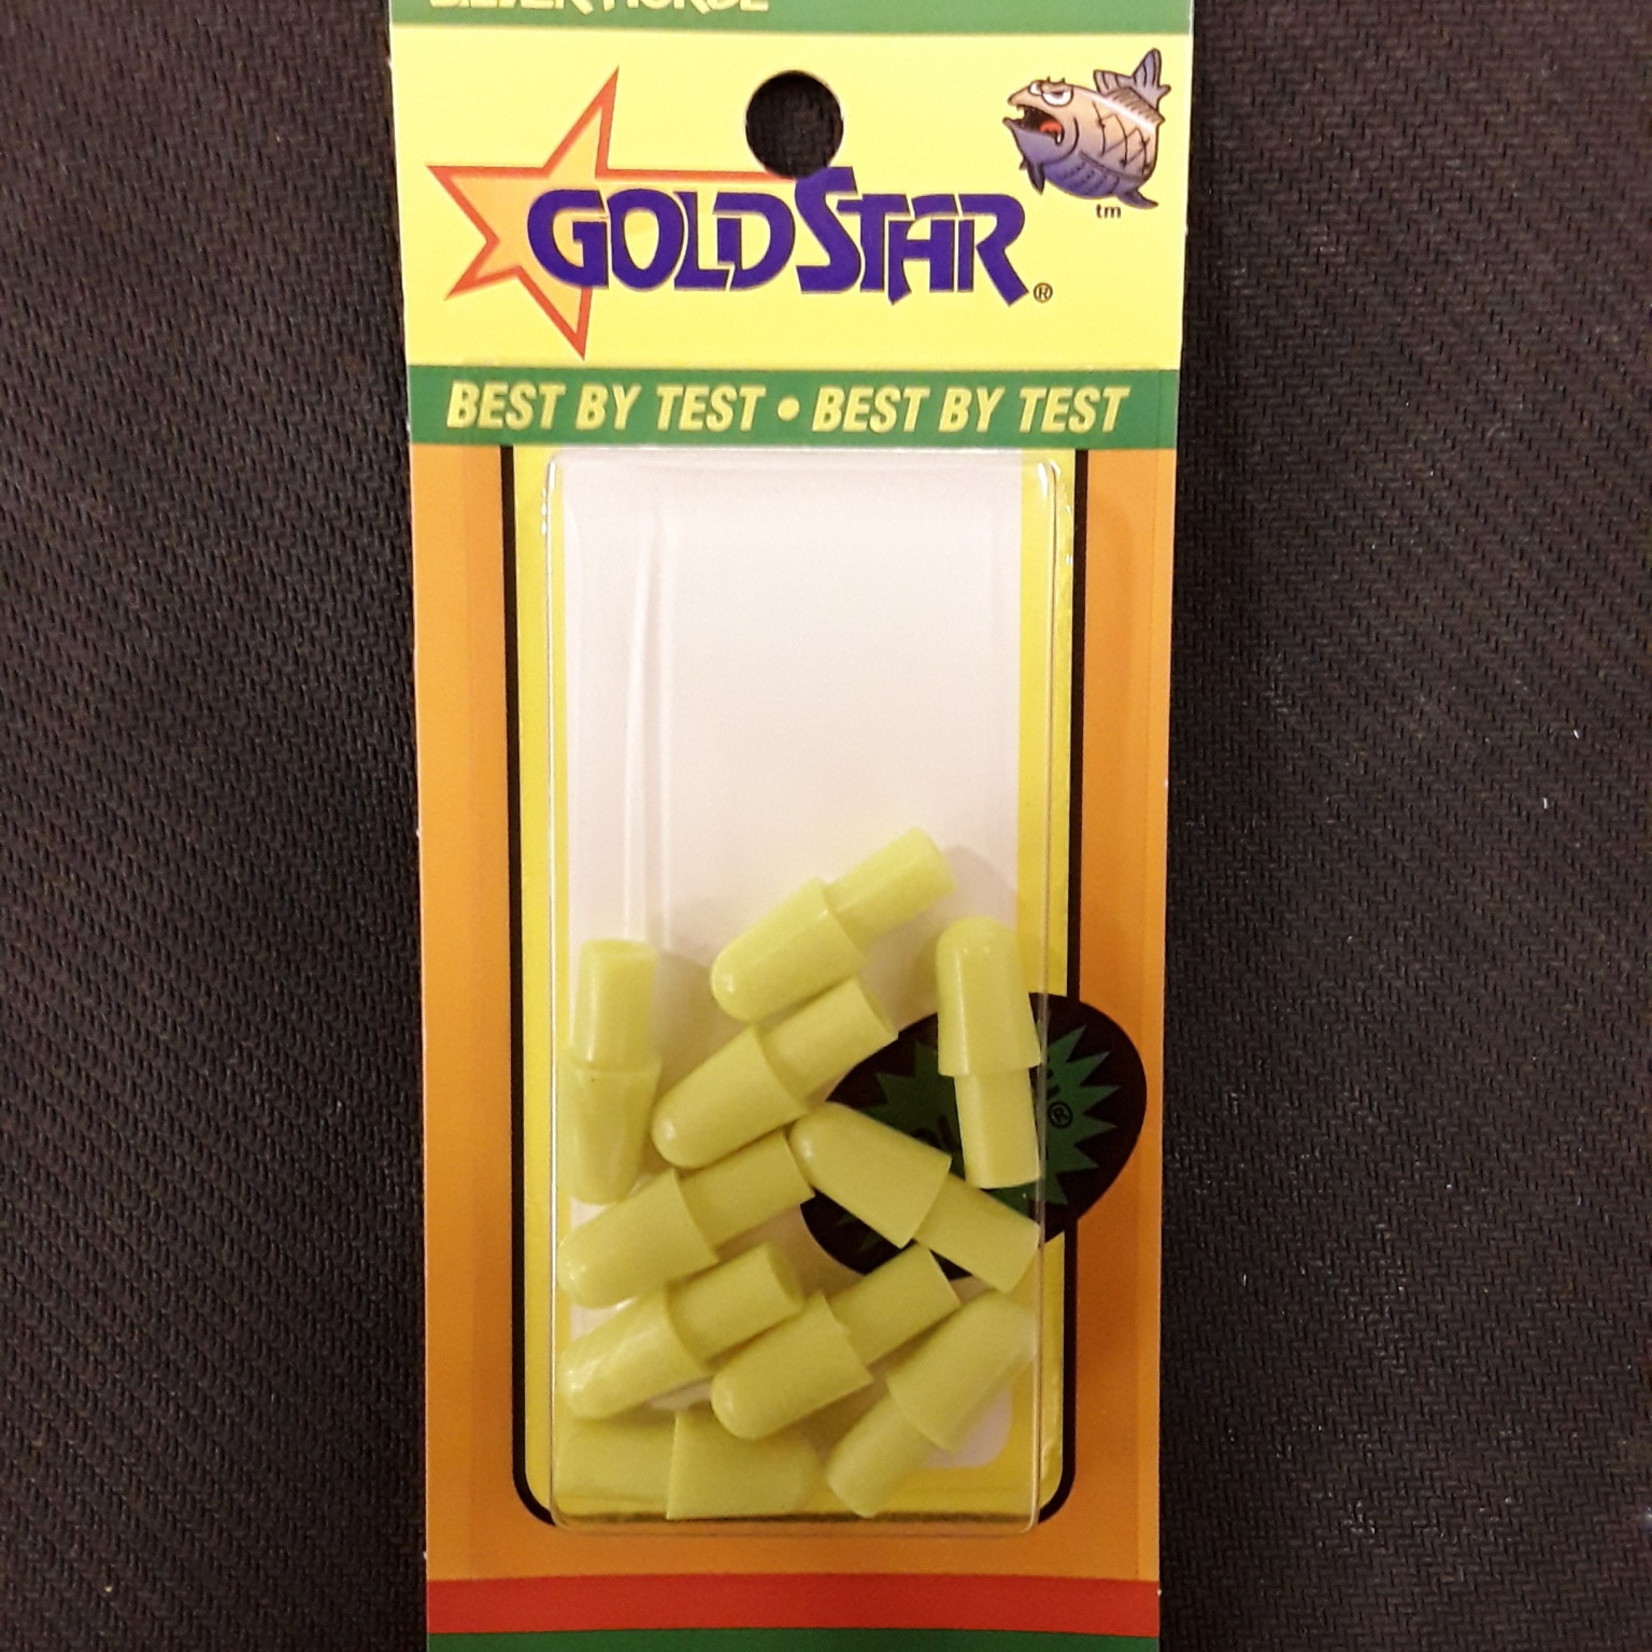 SILVER HORDE Gold Star Lure Head Chartreuse Glow 10pk 5065-000-181